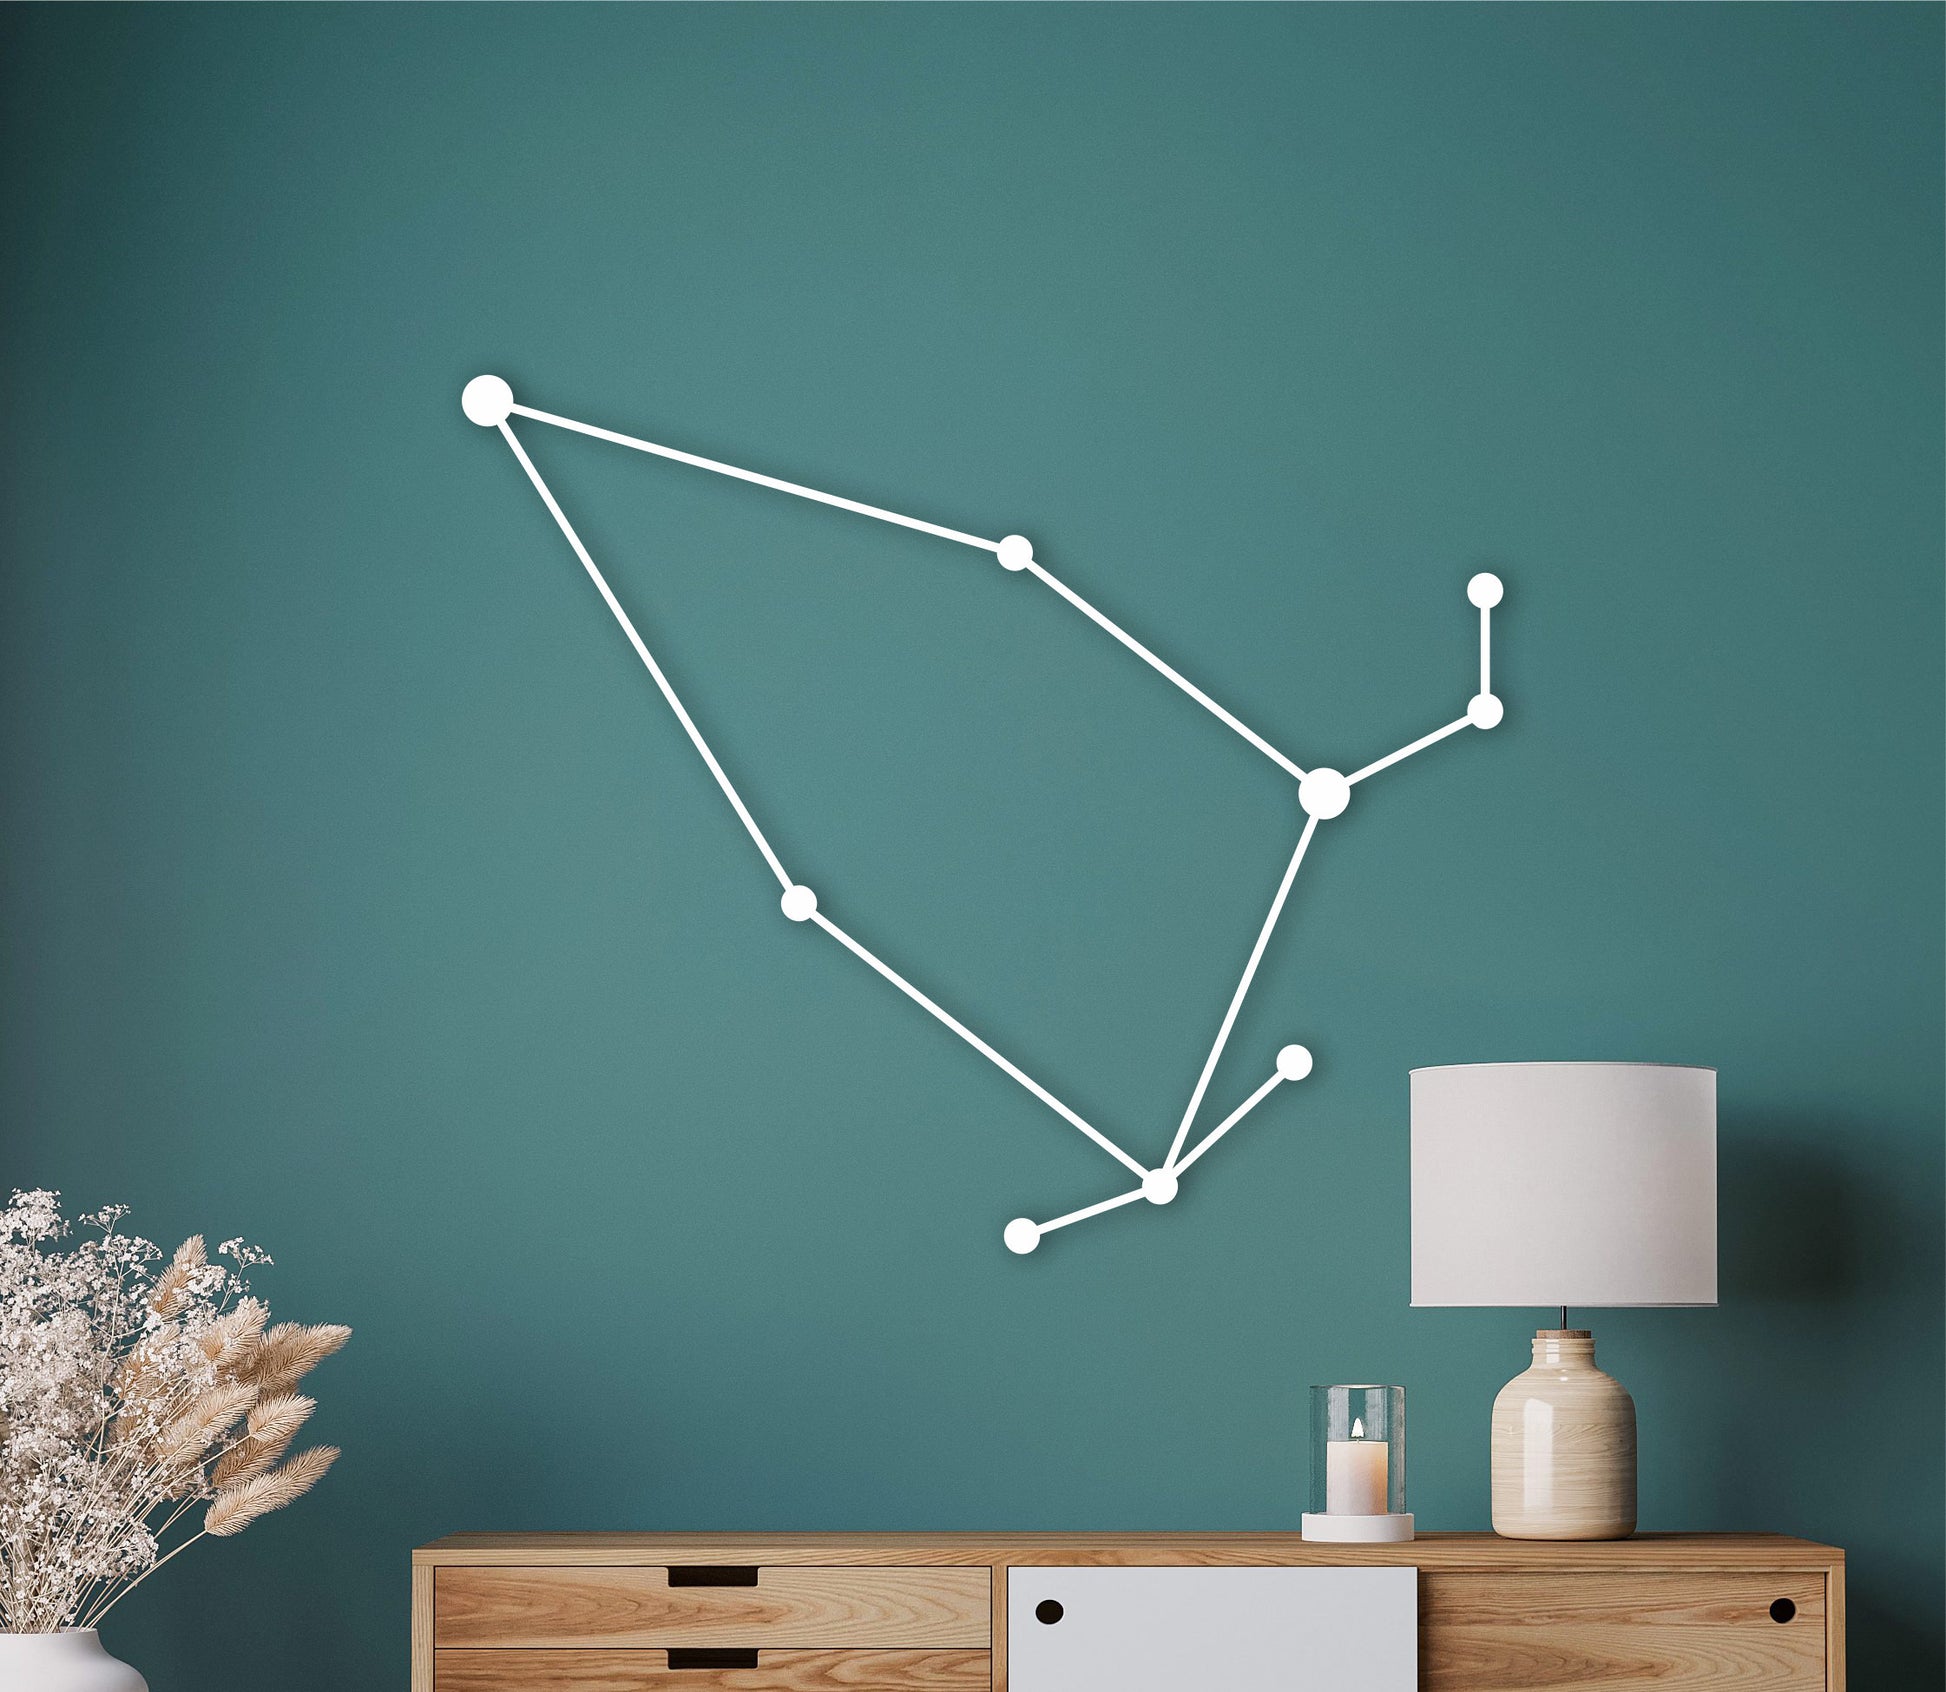 Cepheus constellation, celtic astrology constellation, ancient greek decor, star wall hanging, celestial decor, astronomy gifts